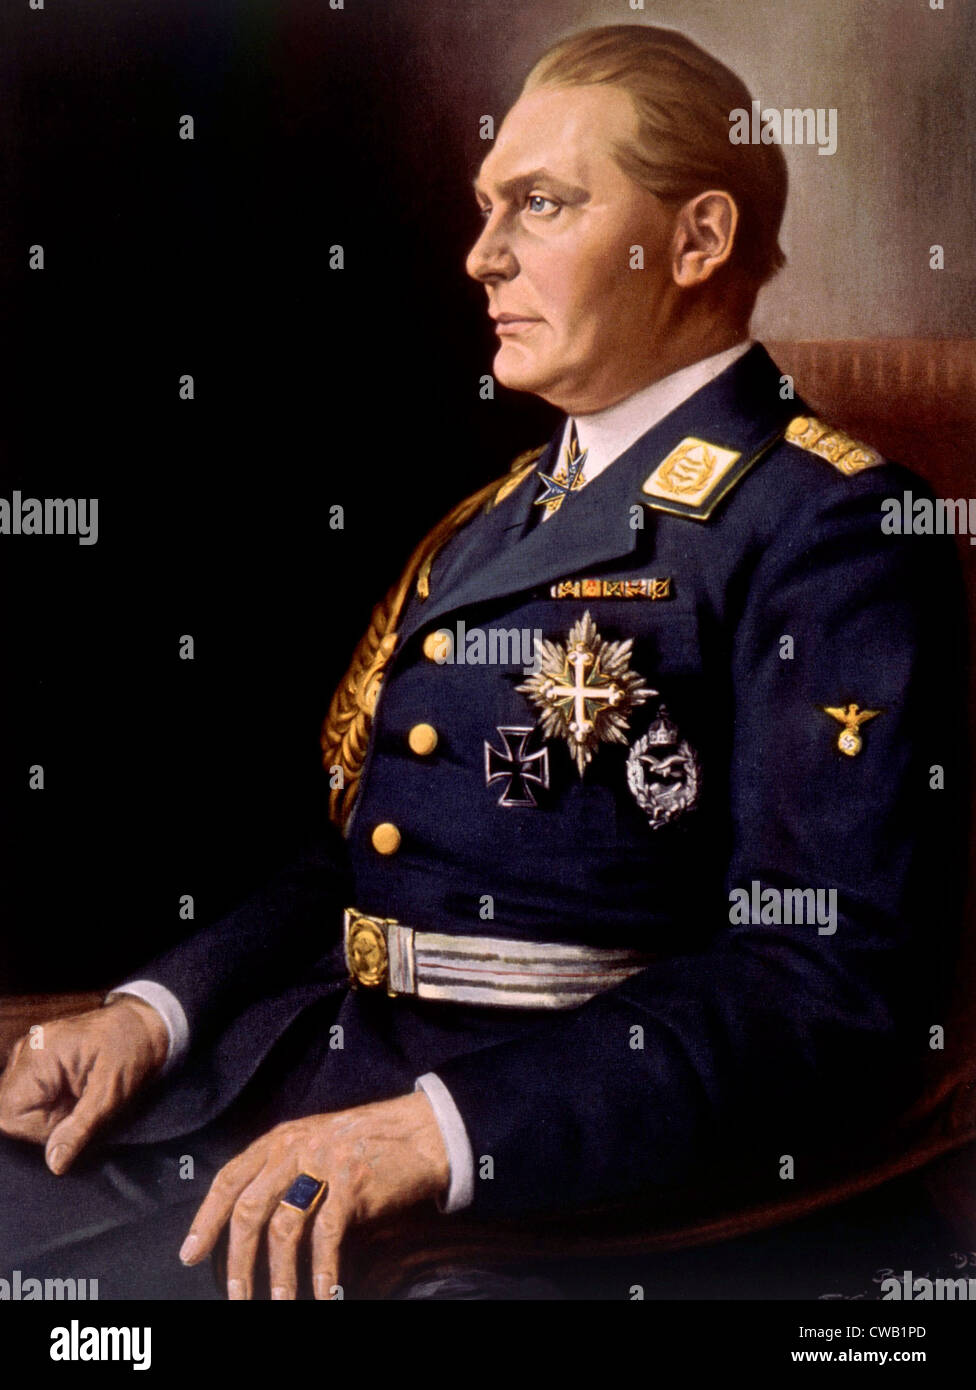 Hermann Goering, (1893-1946), German politician and military leader and leading member of the Nazi Party. 1934 painting by Stock Photo